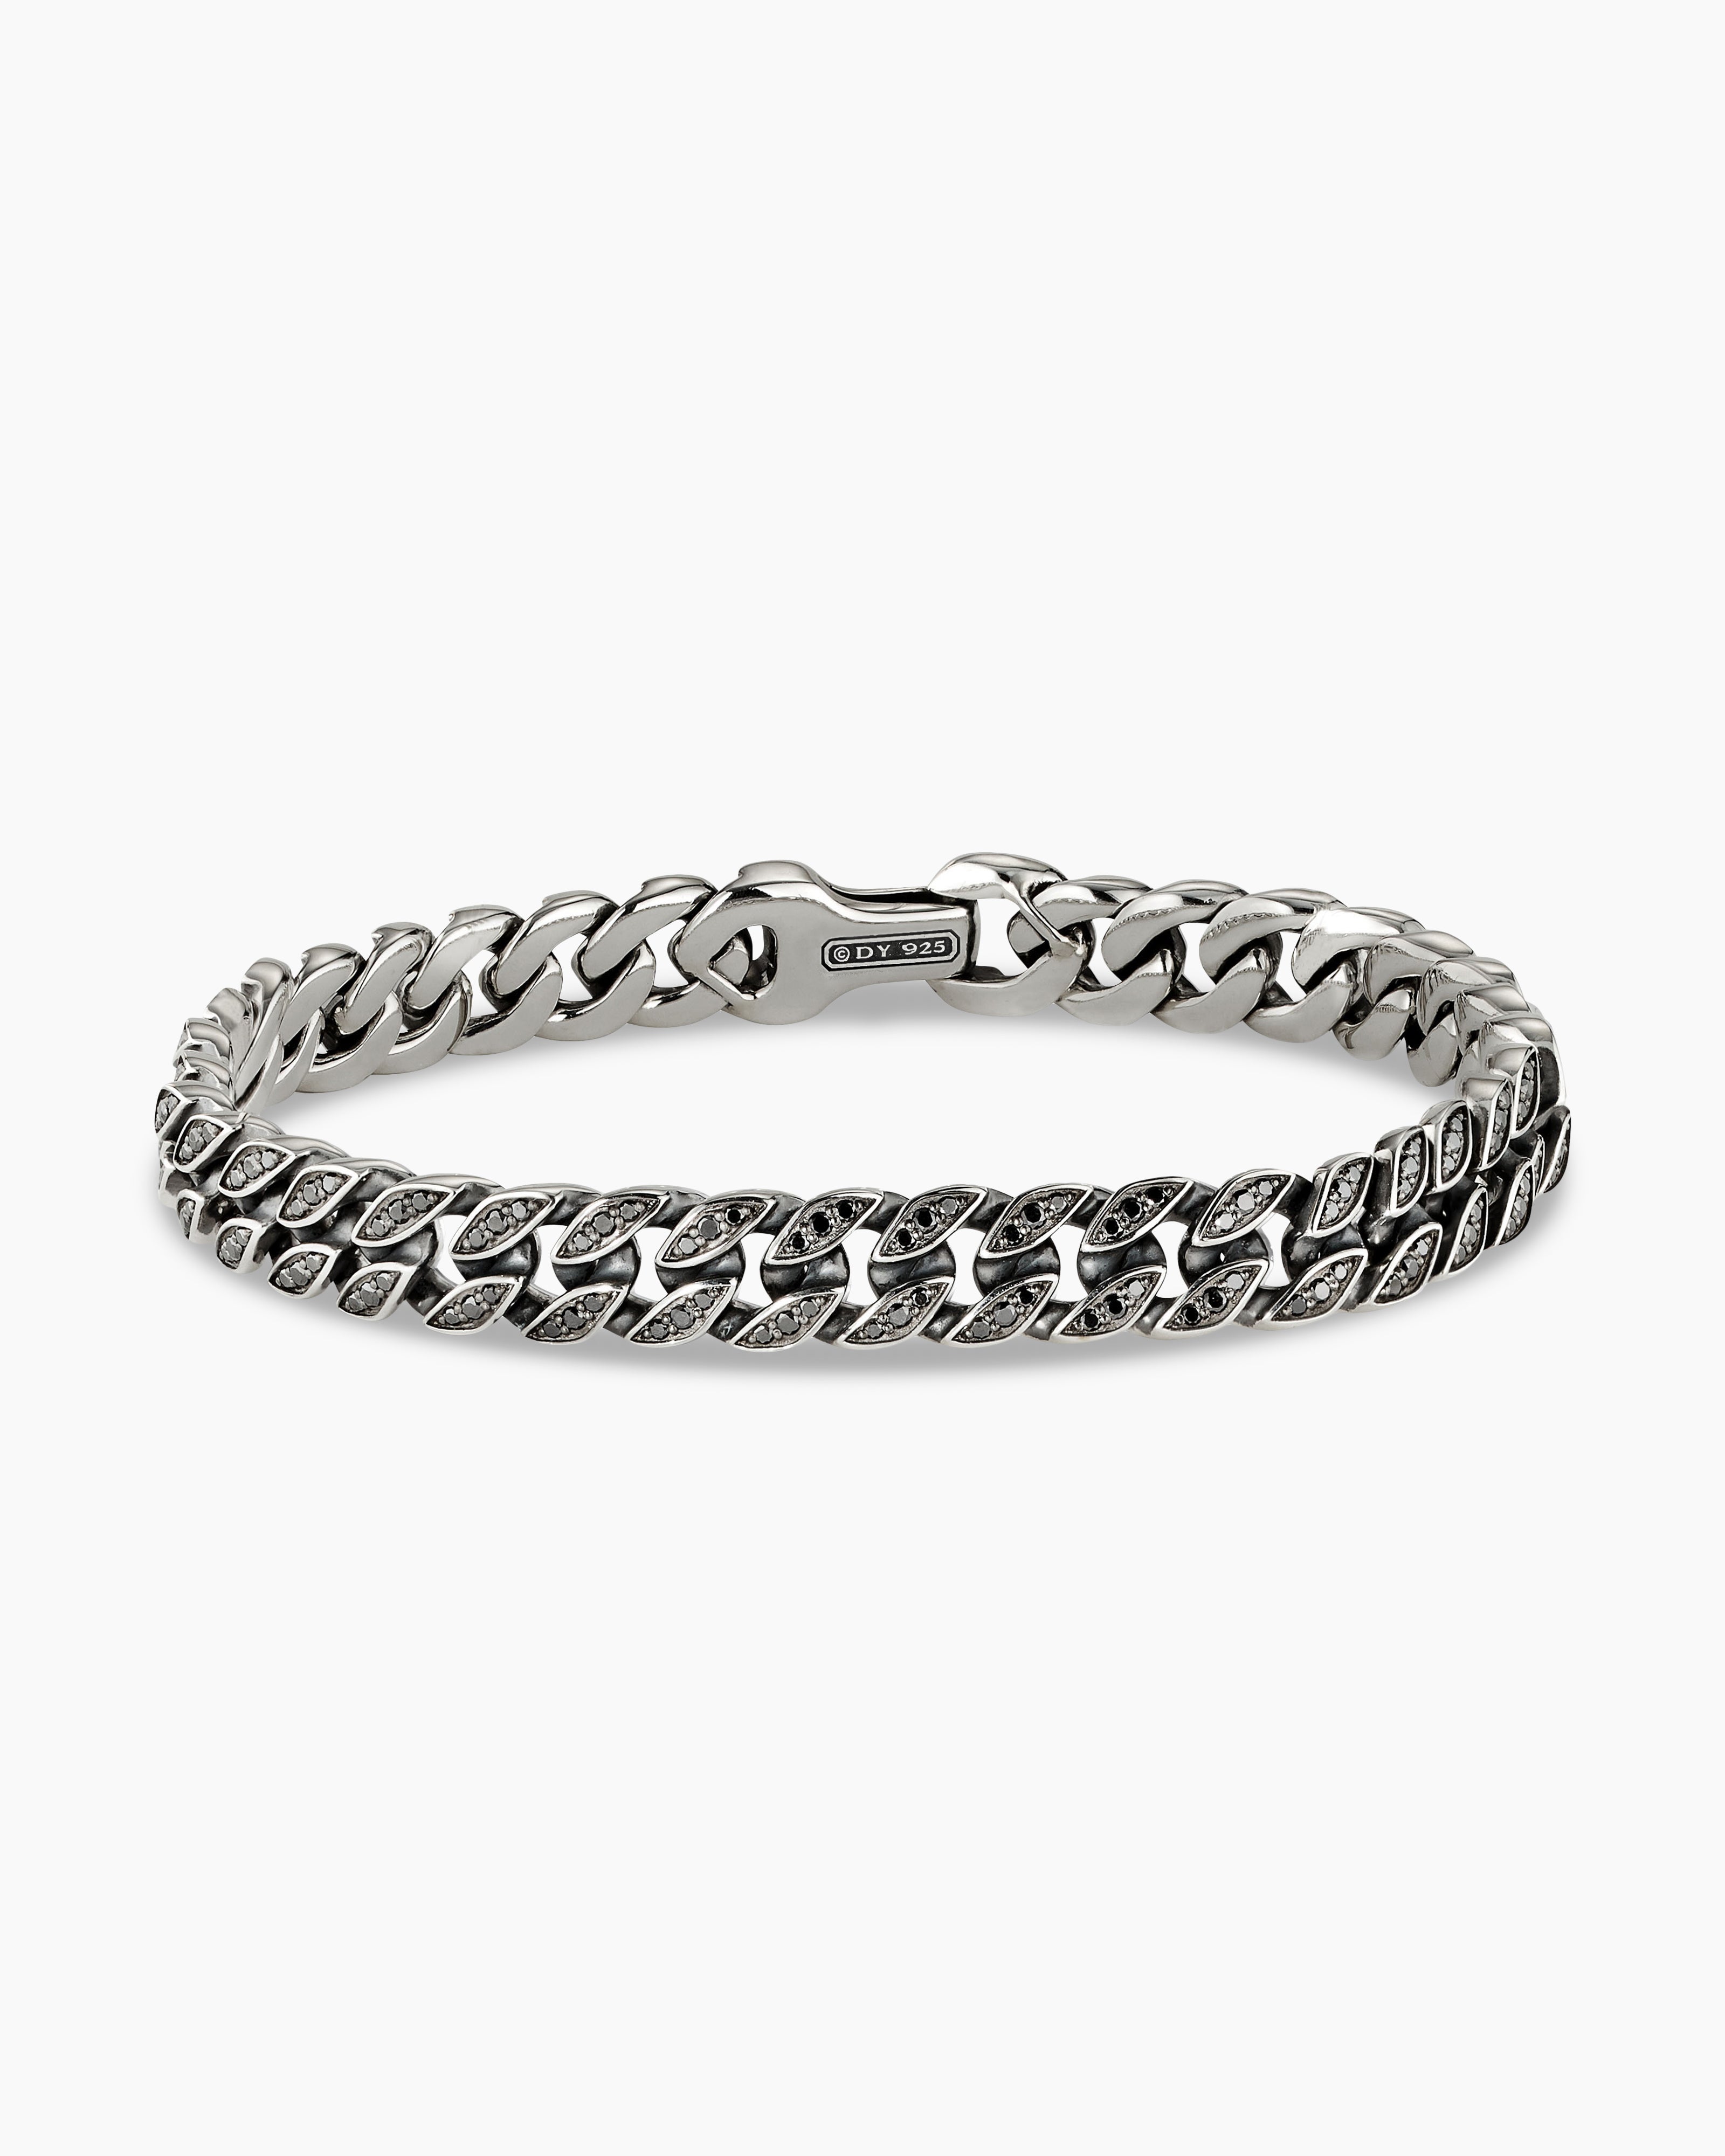 Mens Curb Chain Bracelet in Sterling Silver, 8mm